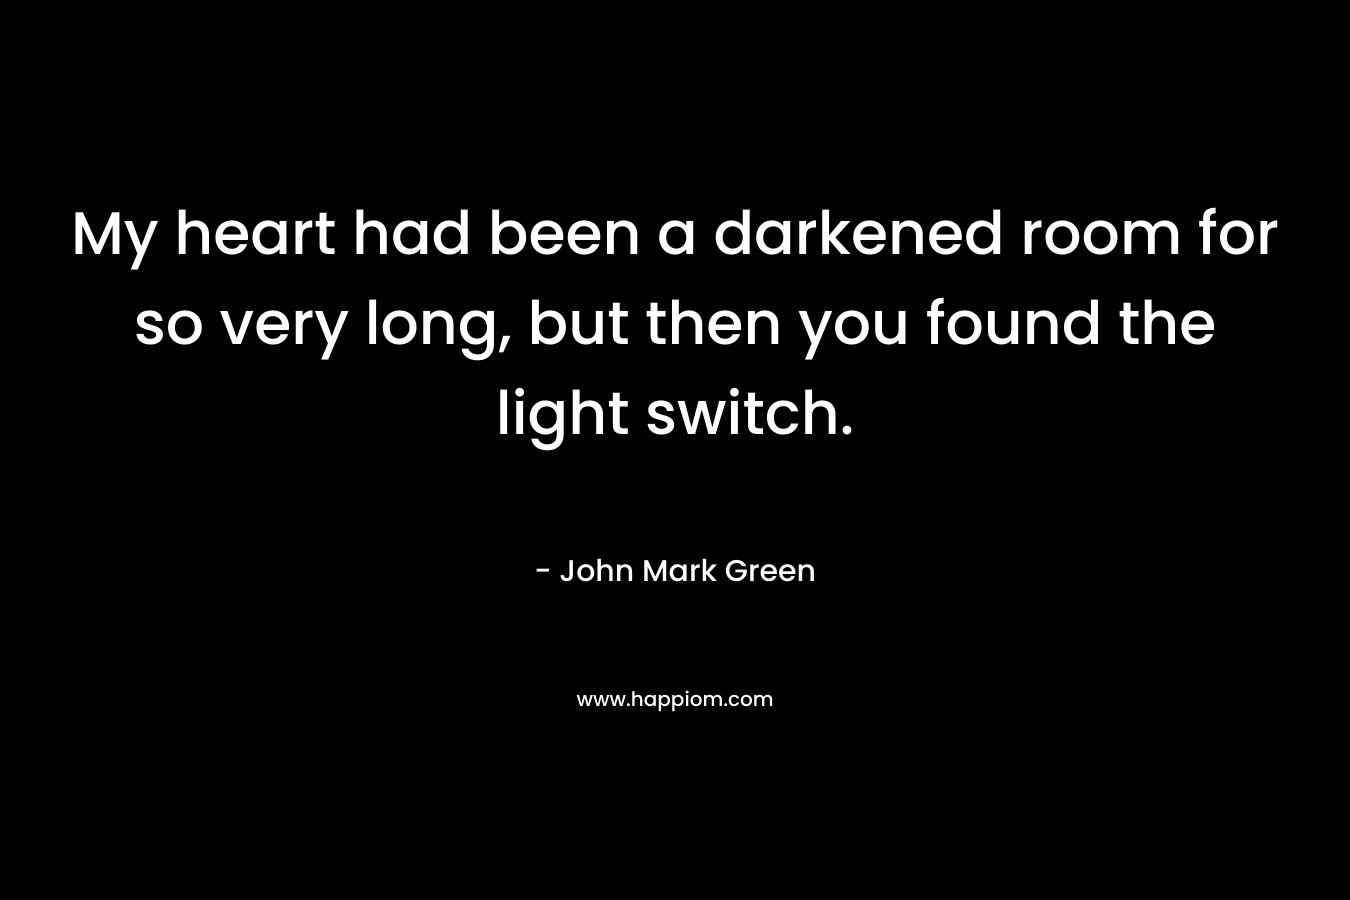 My heart had been a darkened room for so very long, but then you found the light switch.